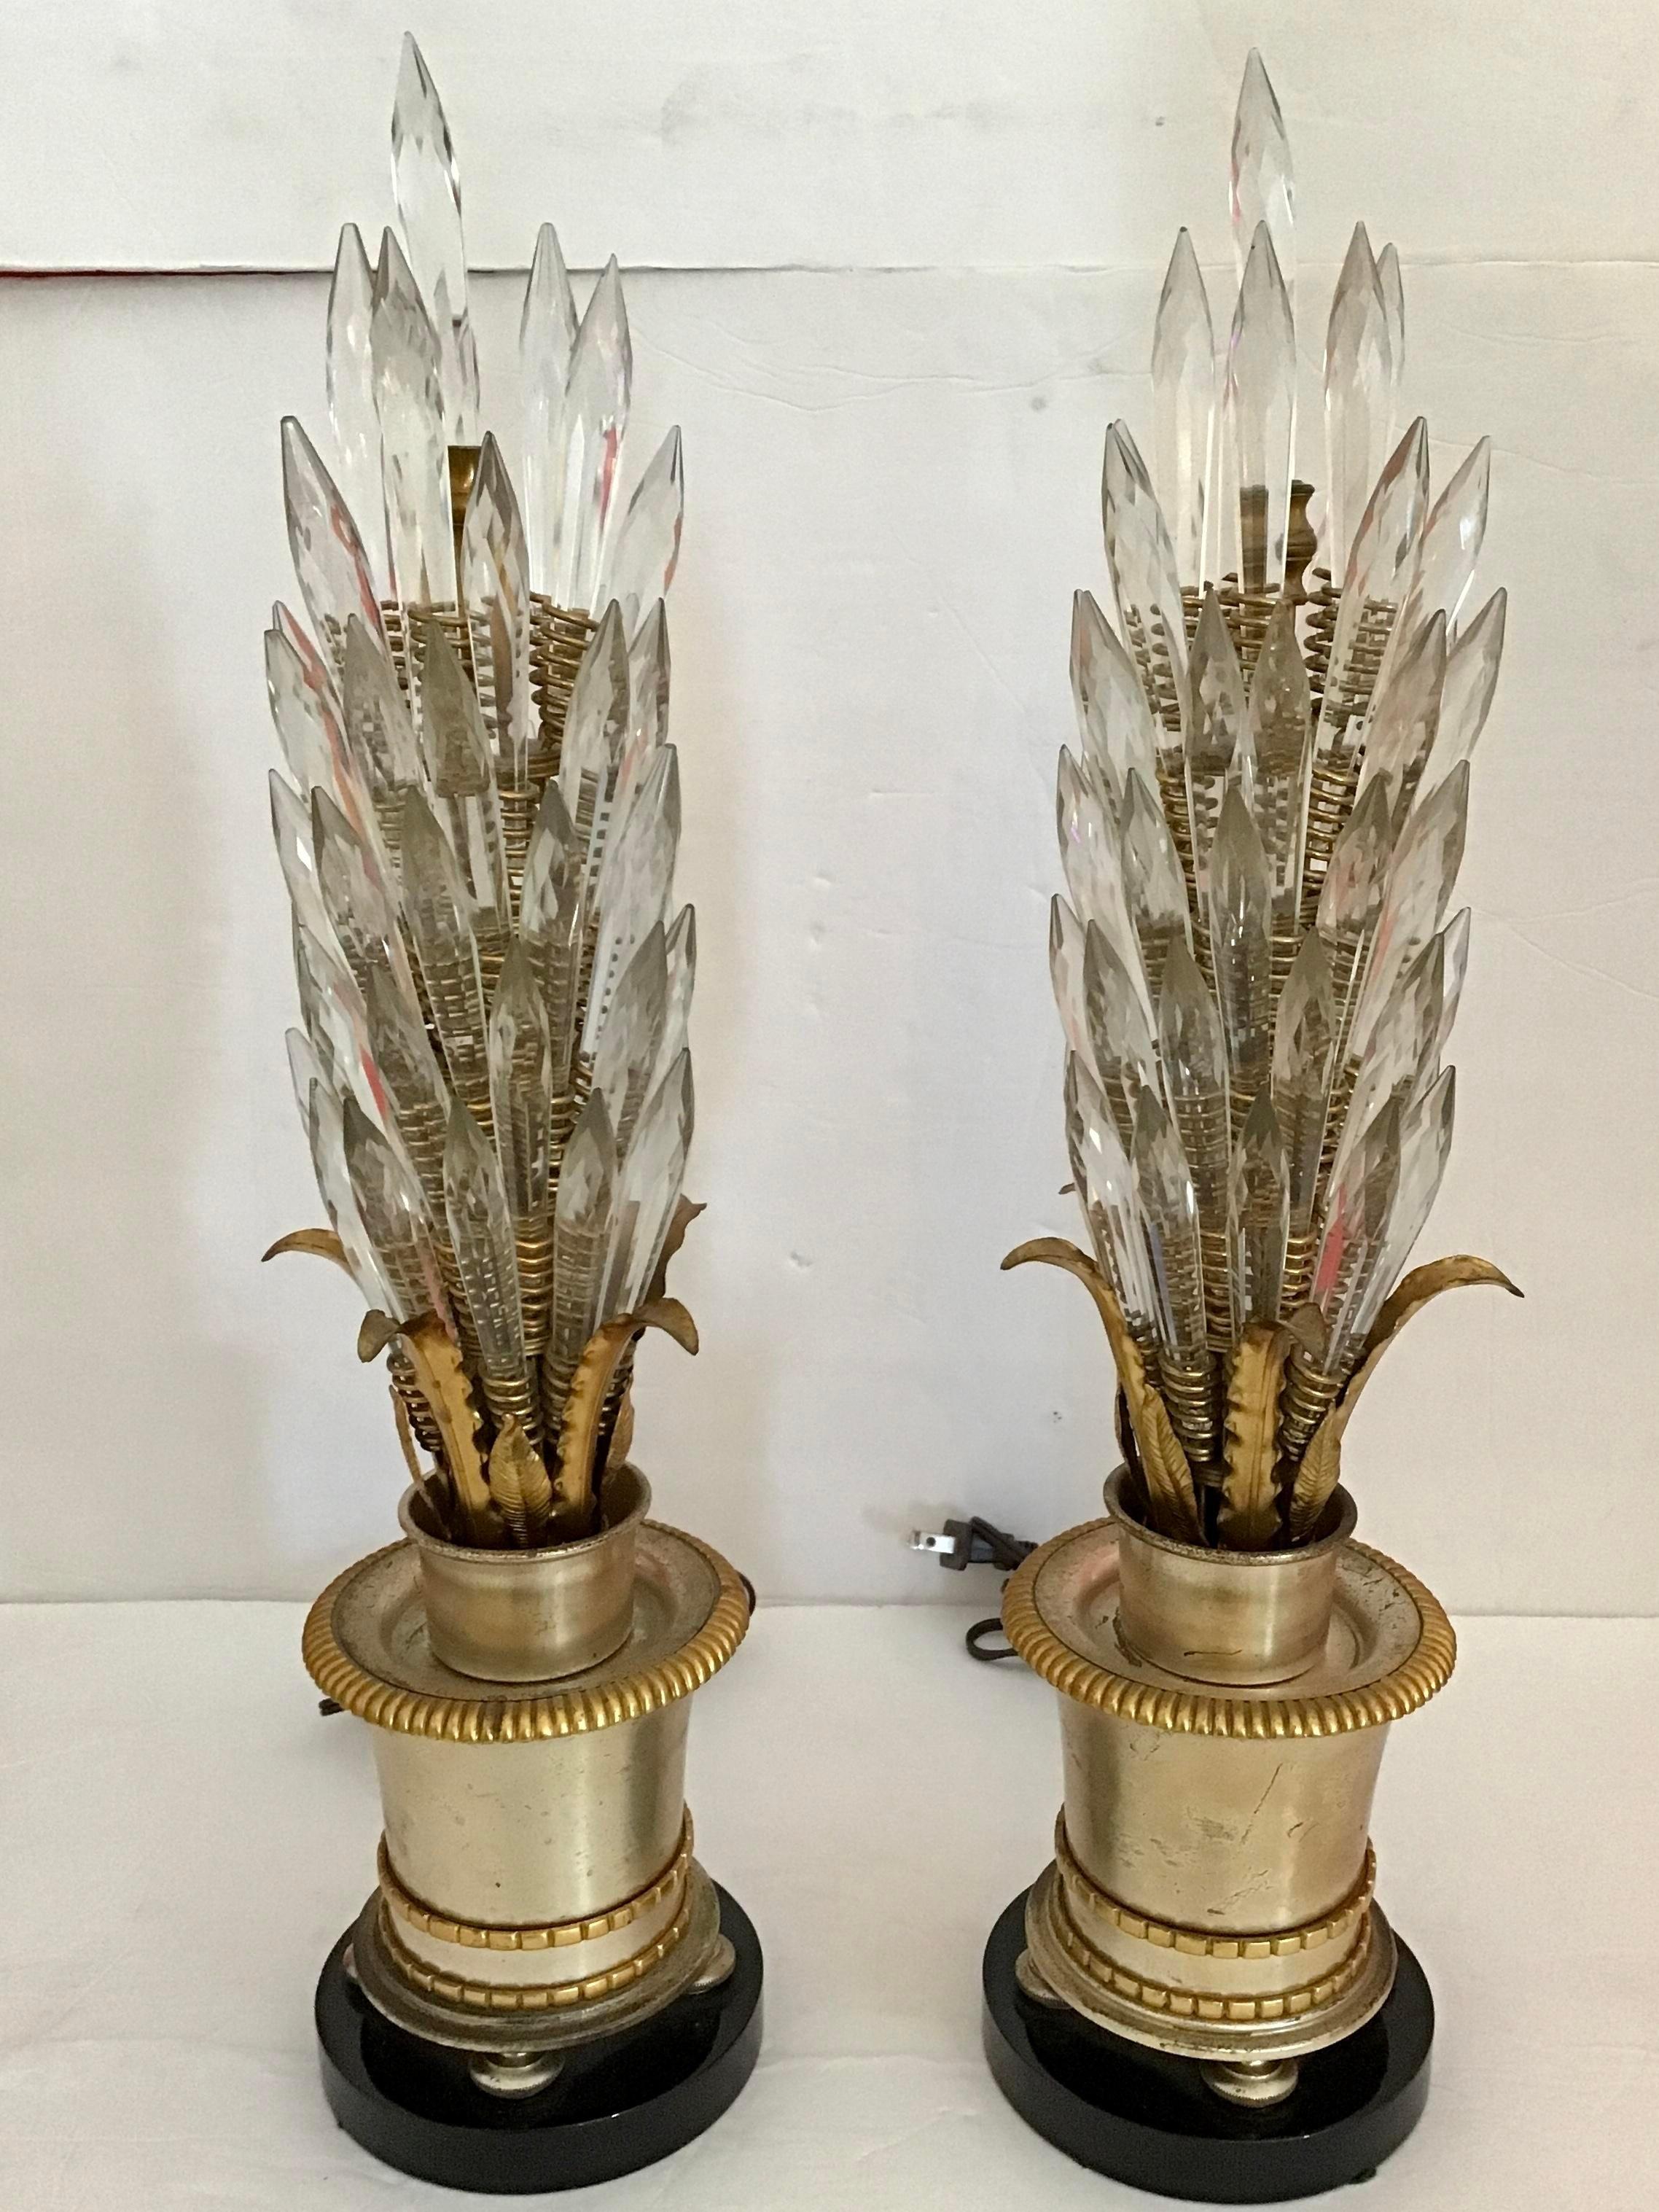 Very elegant pair of Jansen table lamps with crystals adorning like a corn with gilt leaves. Base is metal bronze on small legs. Great details in their design. Would be a nice addition to your interiors, would look great in a studio or library.